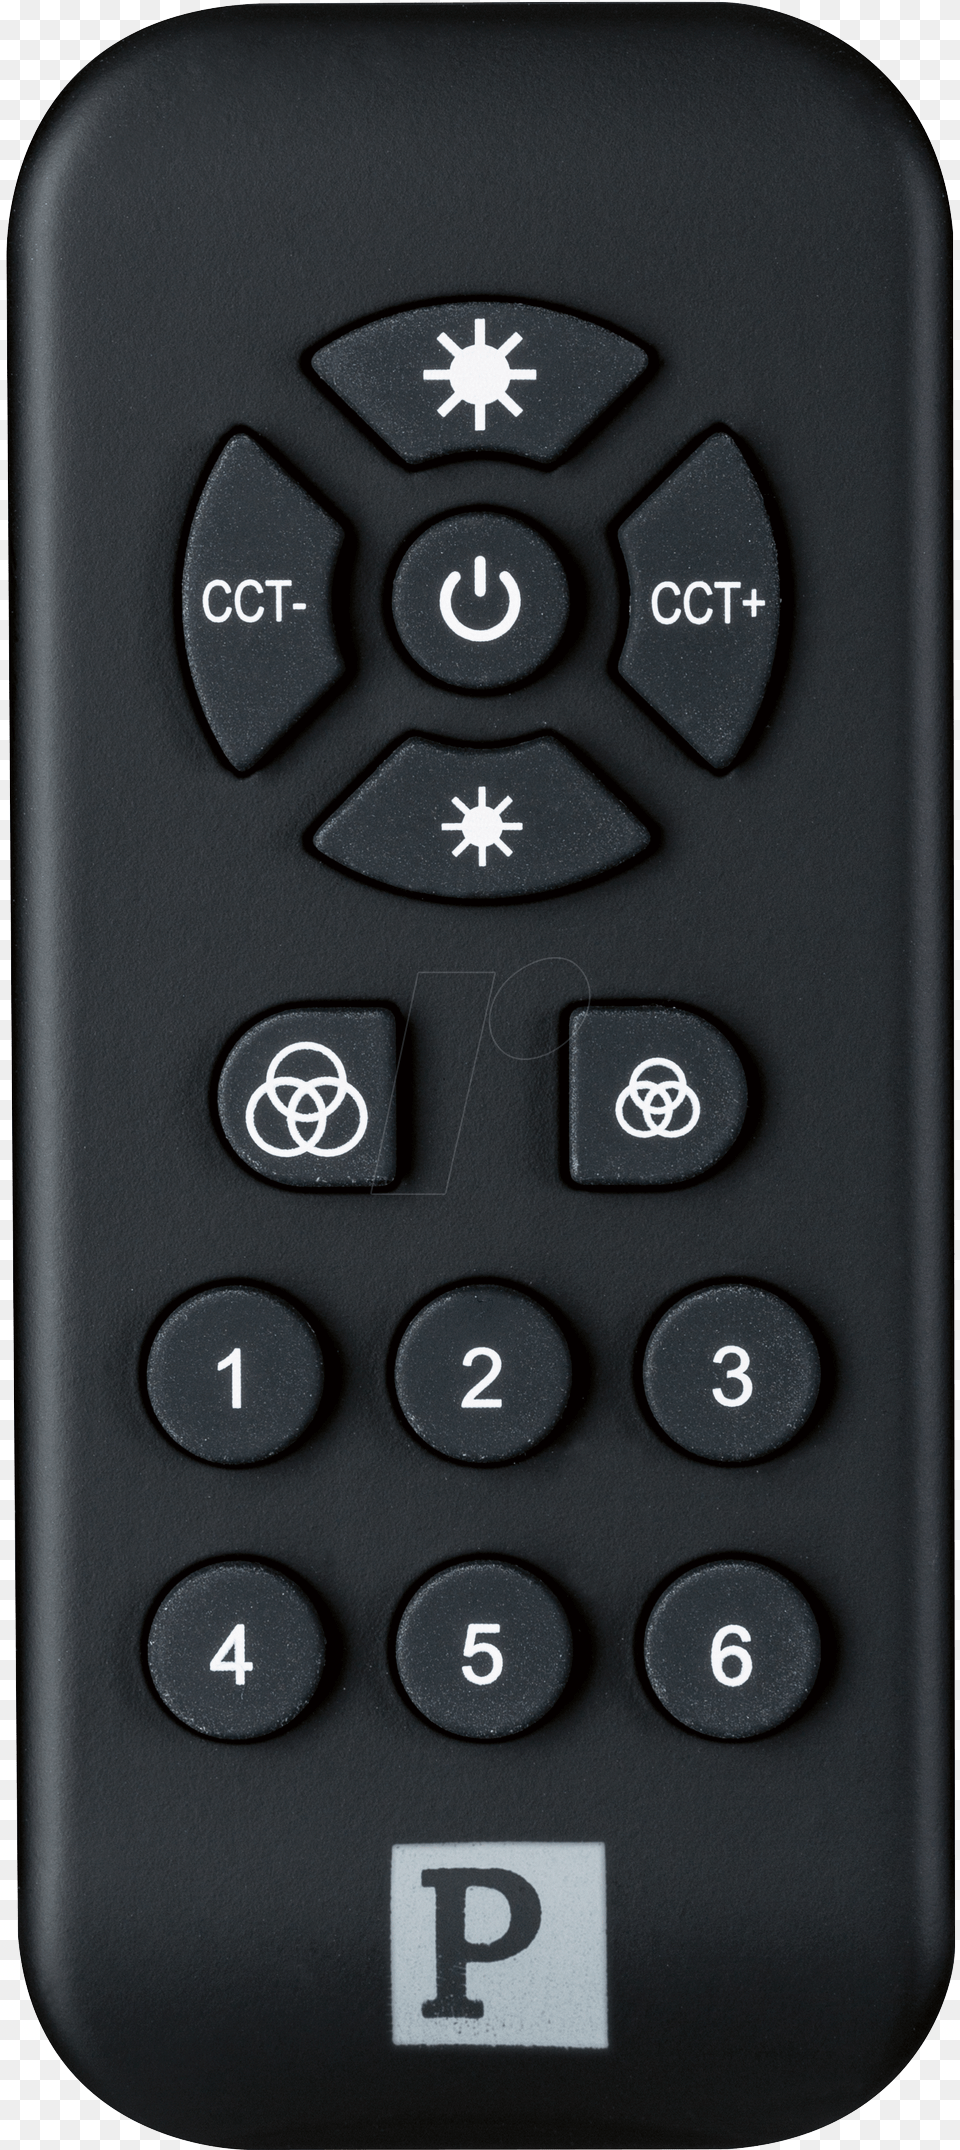 Smarthome Ble Boss Remote Control Paulmann Remote Control, Electronics, Remote Control, Electrical Device, Switch Png